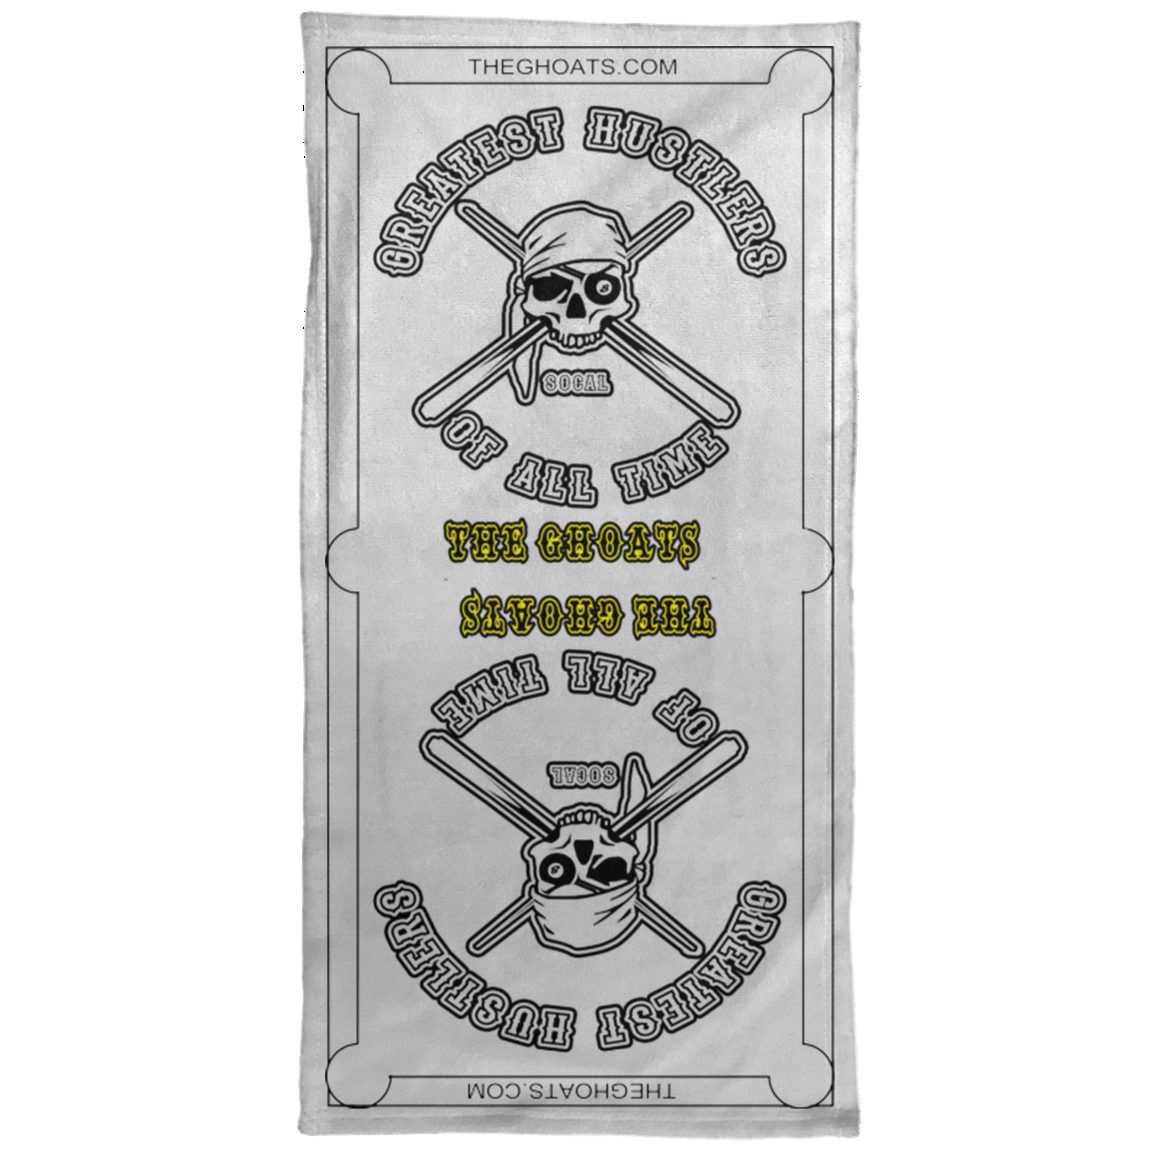 The GHOATS Custom Design. #4 Motorcycle Club Style. Ver 1/2. Towel - 15x30